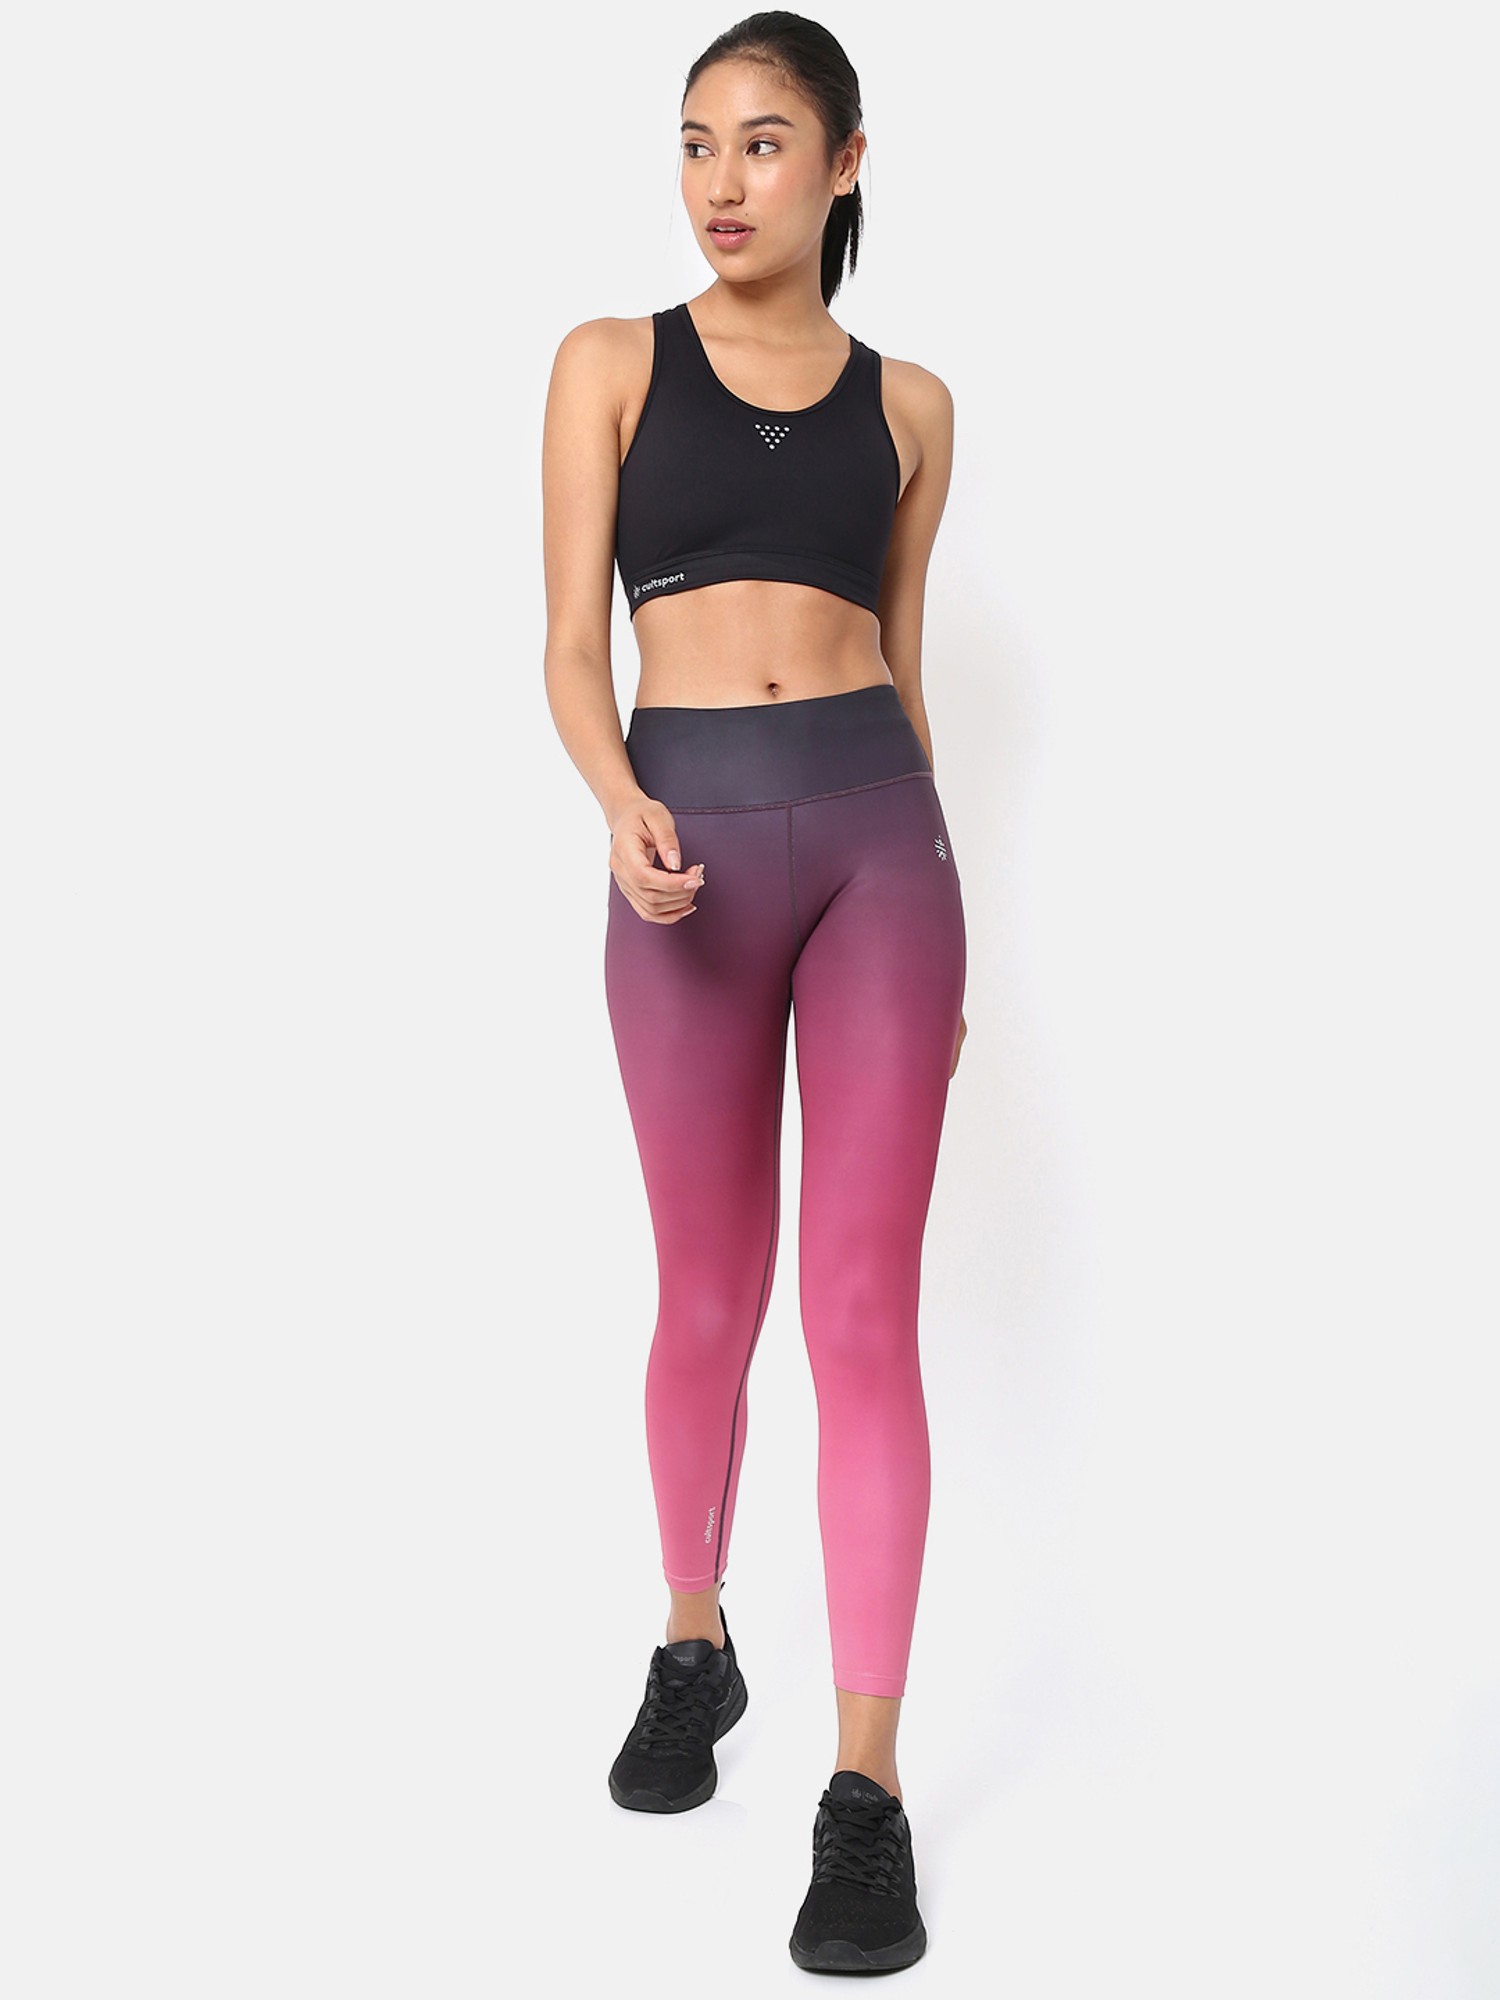 CULTSPORT AbsoluteFit Solid Workout Tights